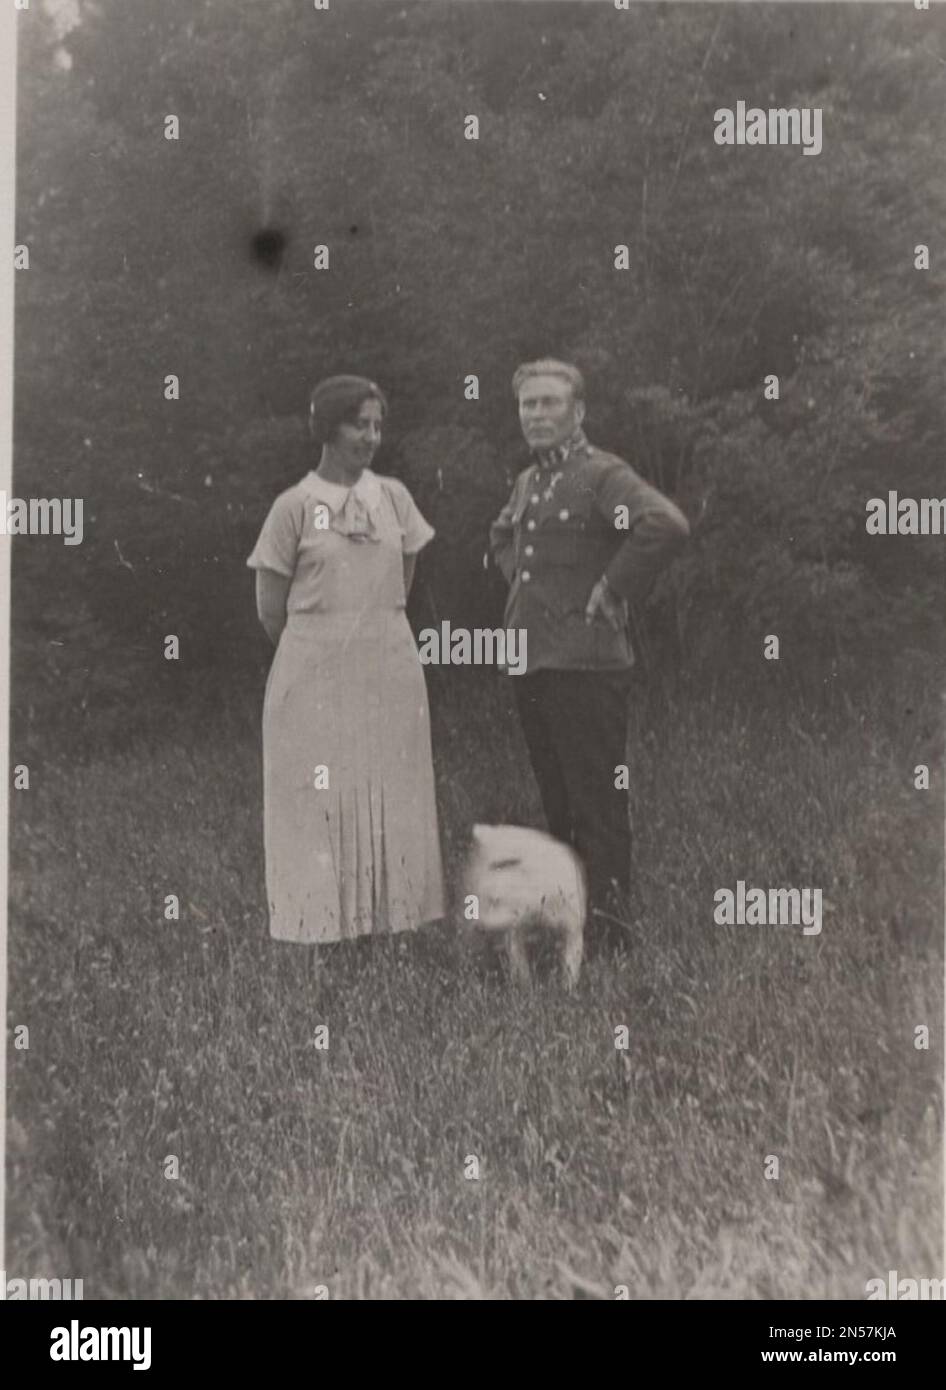 Vintage Photograph about a ( pet dog) high ranking miliary officer in uniform ( austro-hungarian officer? germany officer ? any other european military officer ) with his wife and them little white dog at the 1910s or 1930s Stock Photo